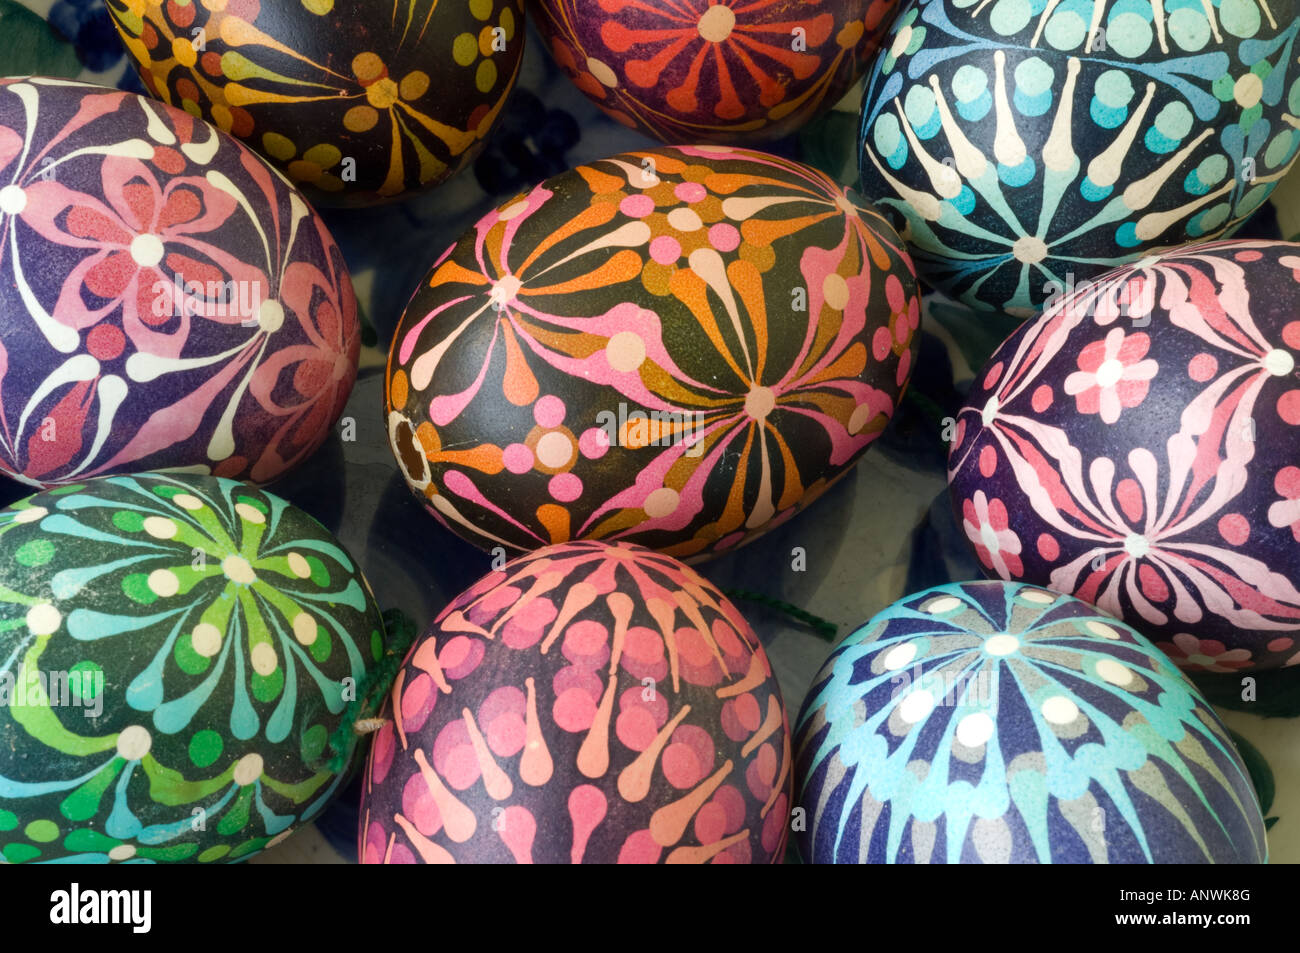 Collection of Easter Eggs decorated using batik method by Krystyna Majewska from Gdansk, Poland Stock Photo